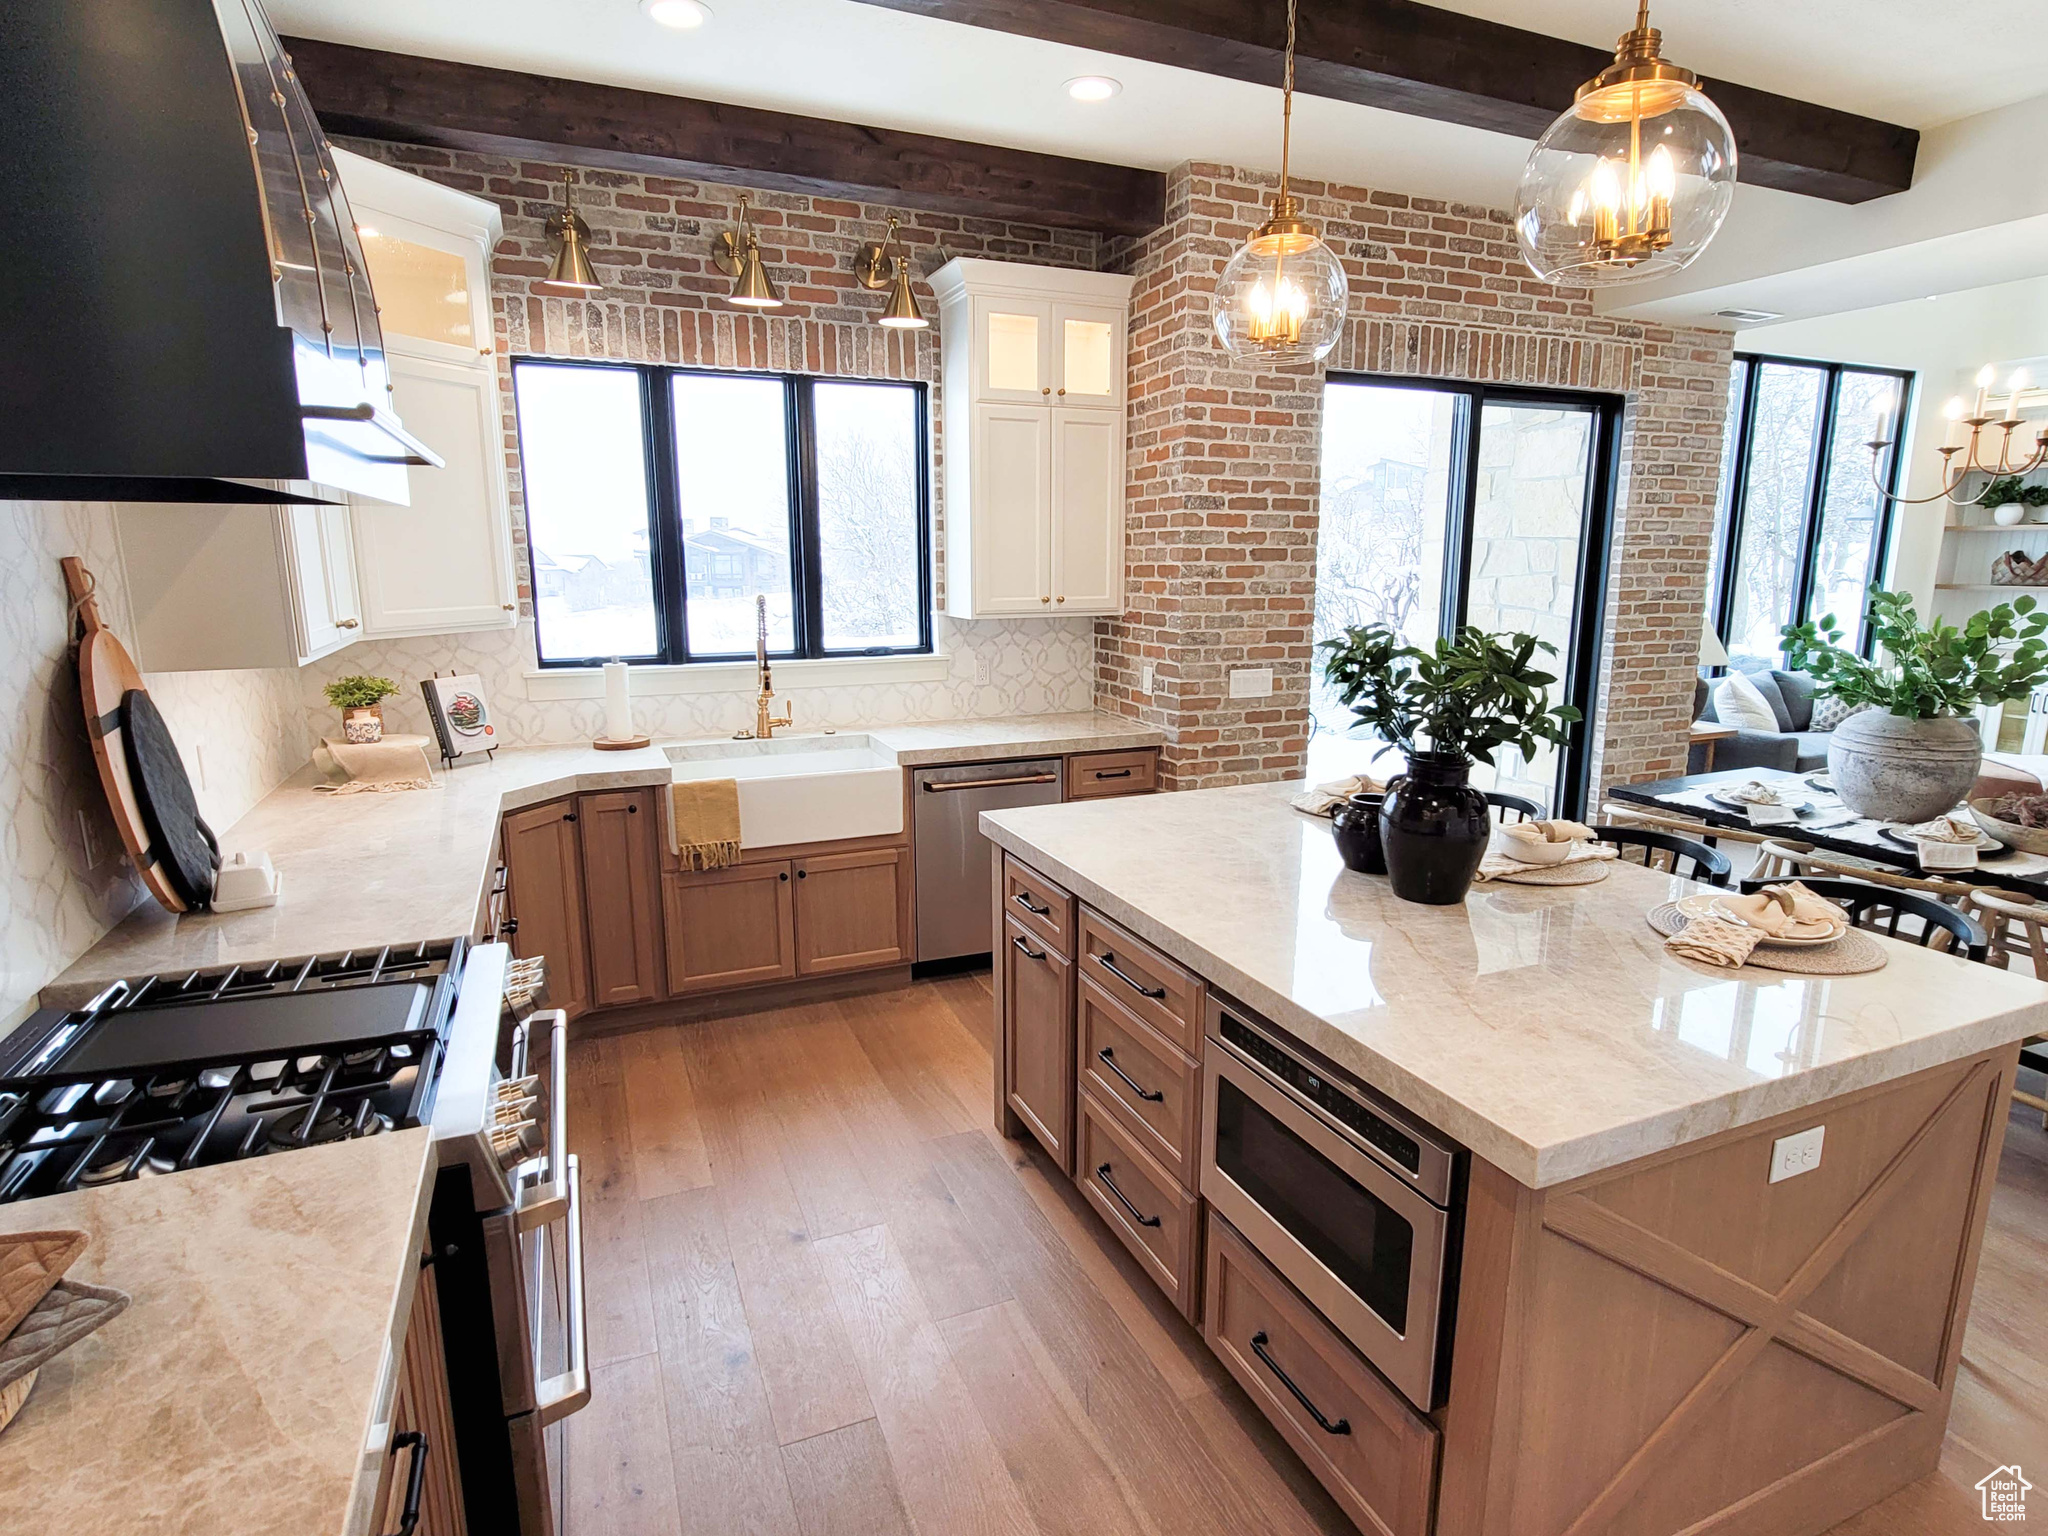 Kitchen with appliances with stainless steel finishes, a center island, sink, backsplash, and light wood-type flooring